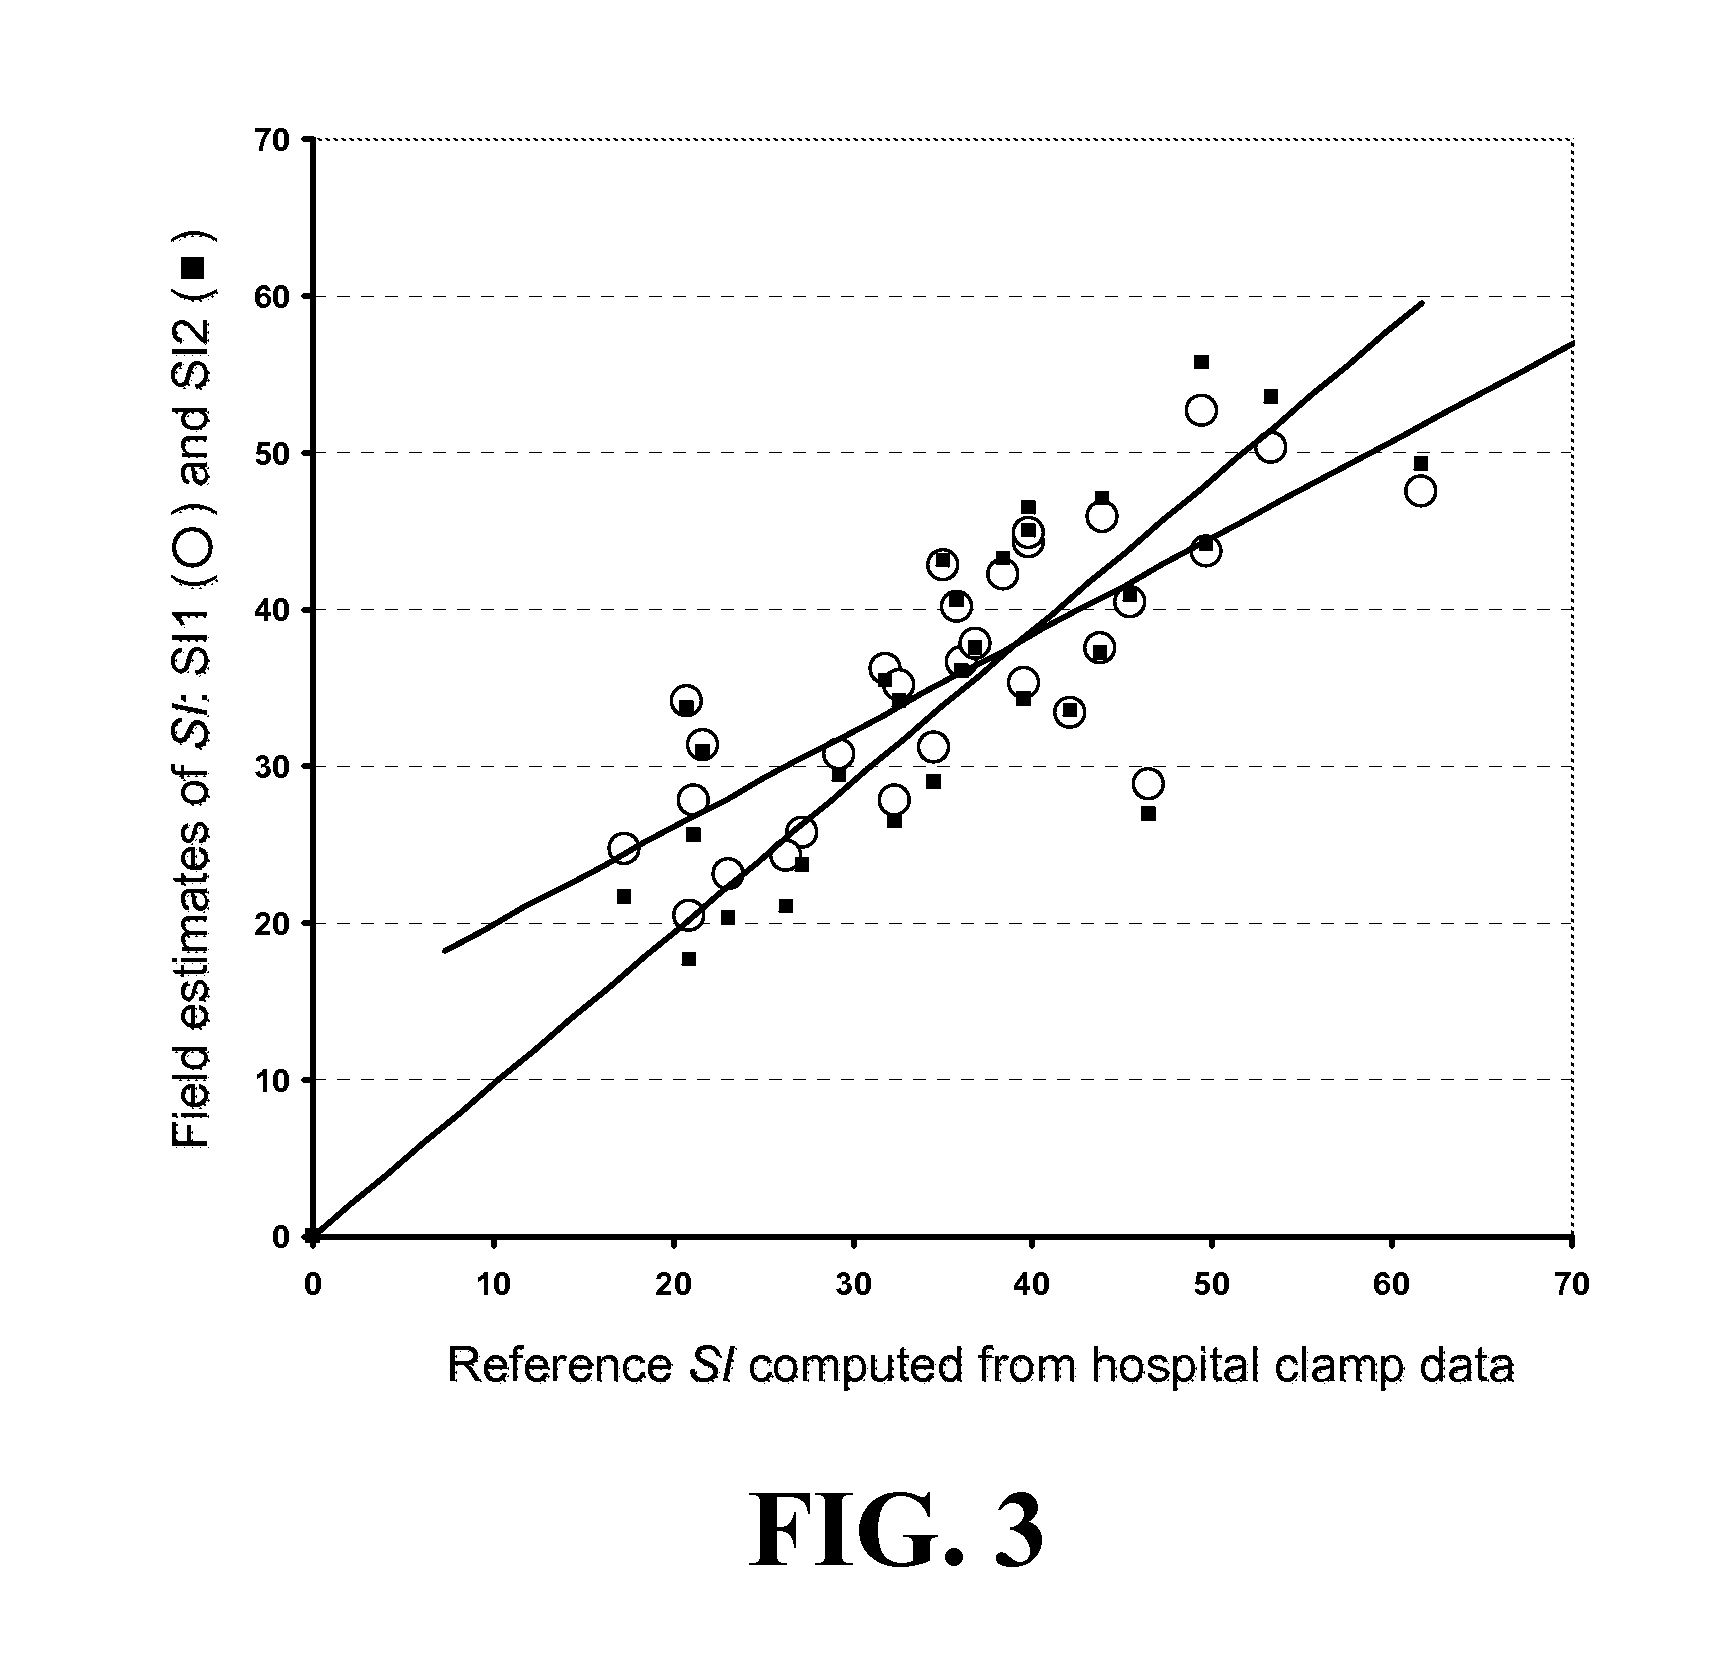 Method, System and Computer Program Product for Evaluation of Insulin Sensitivity, Insulin/Carbohydrate Ratio, and Insulin Correction Factors in Diabetes from Self-Monitoring Data